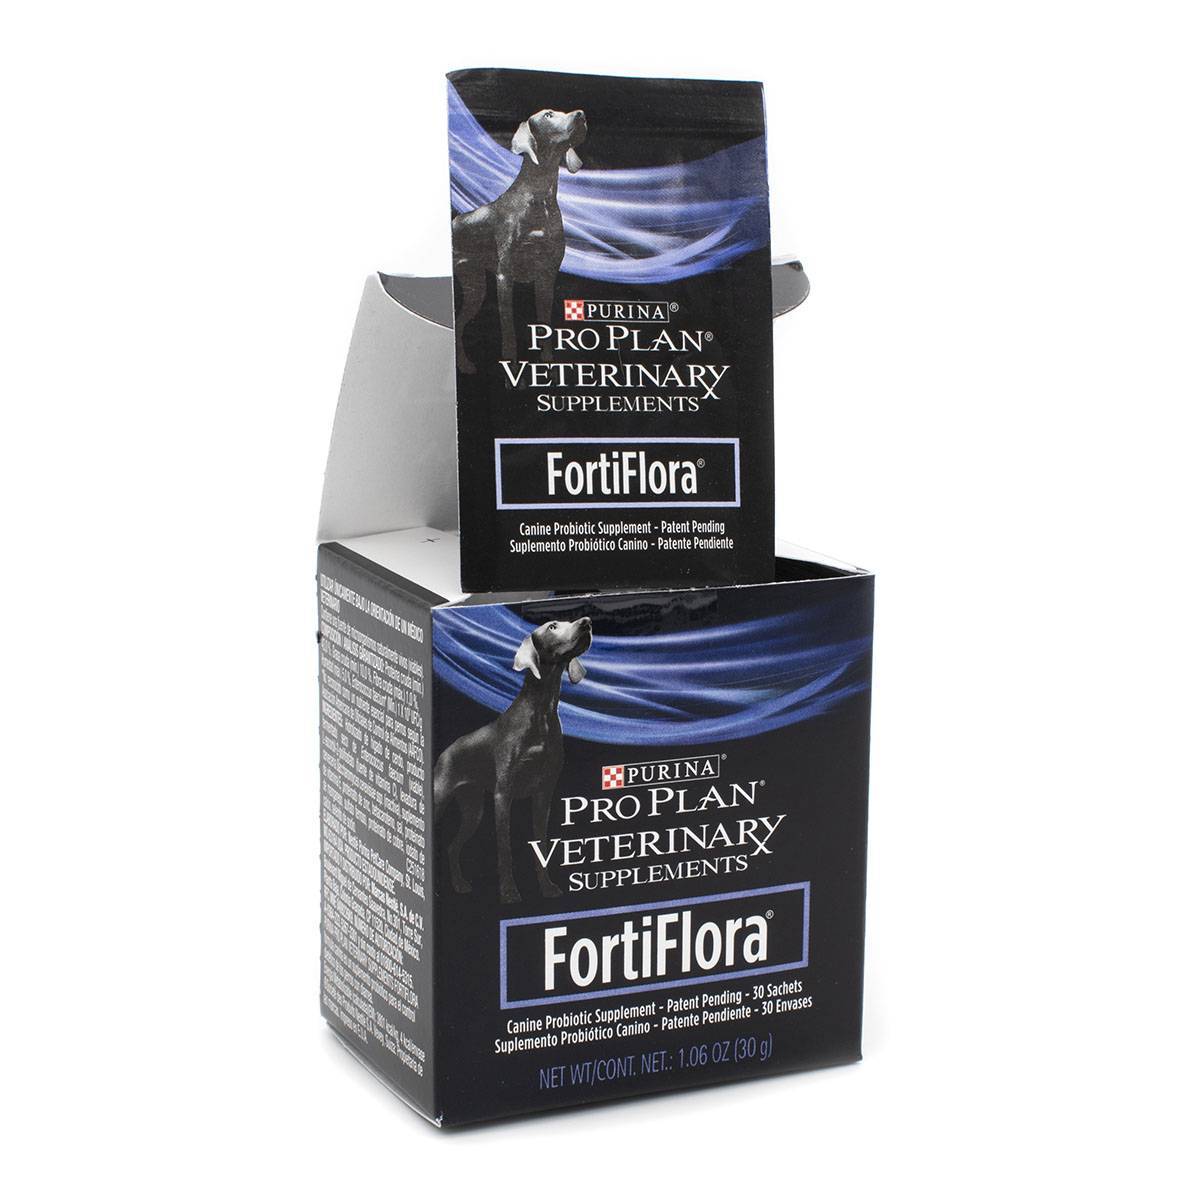 What Does Fortiflora Do For Dogs